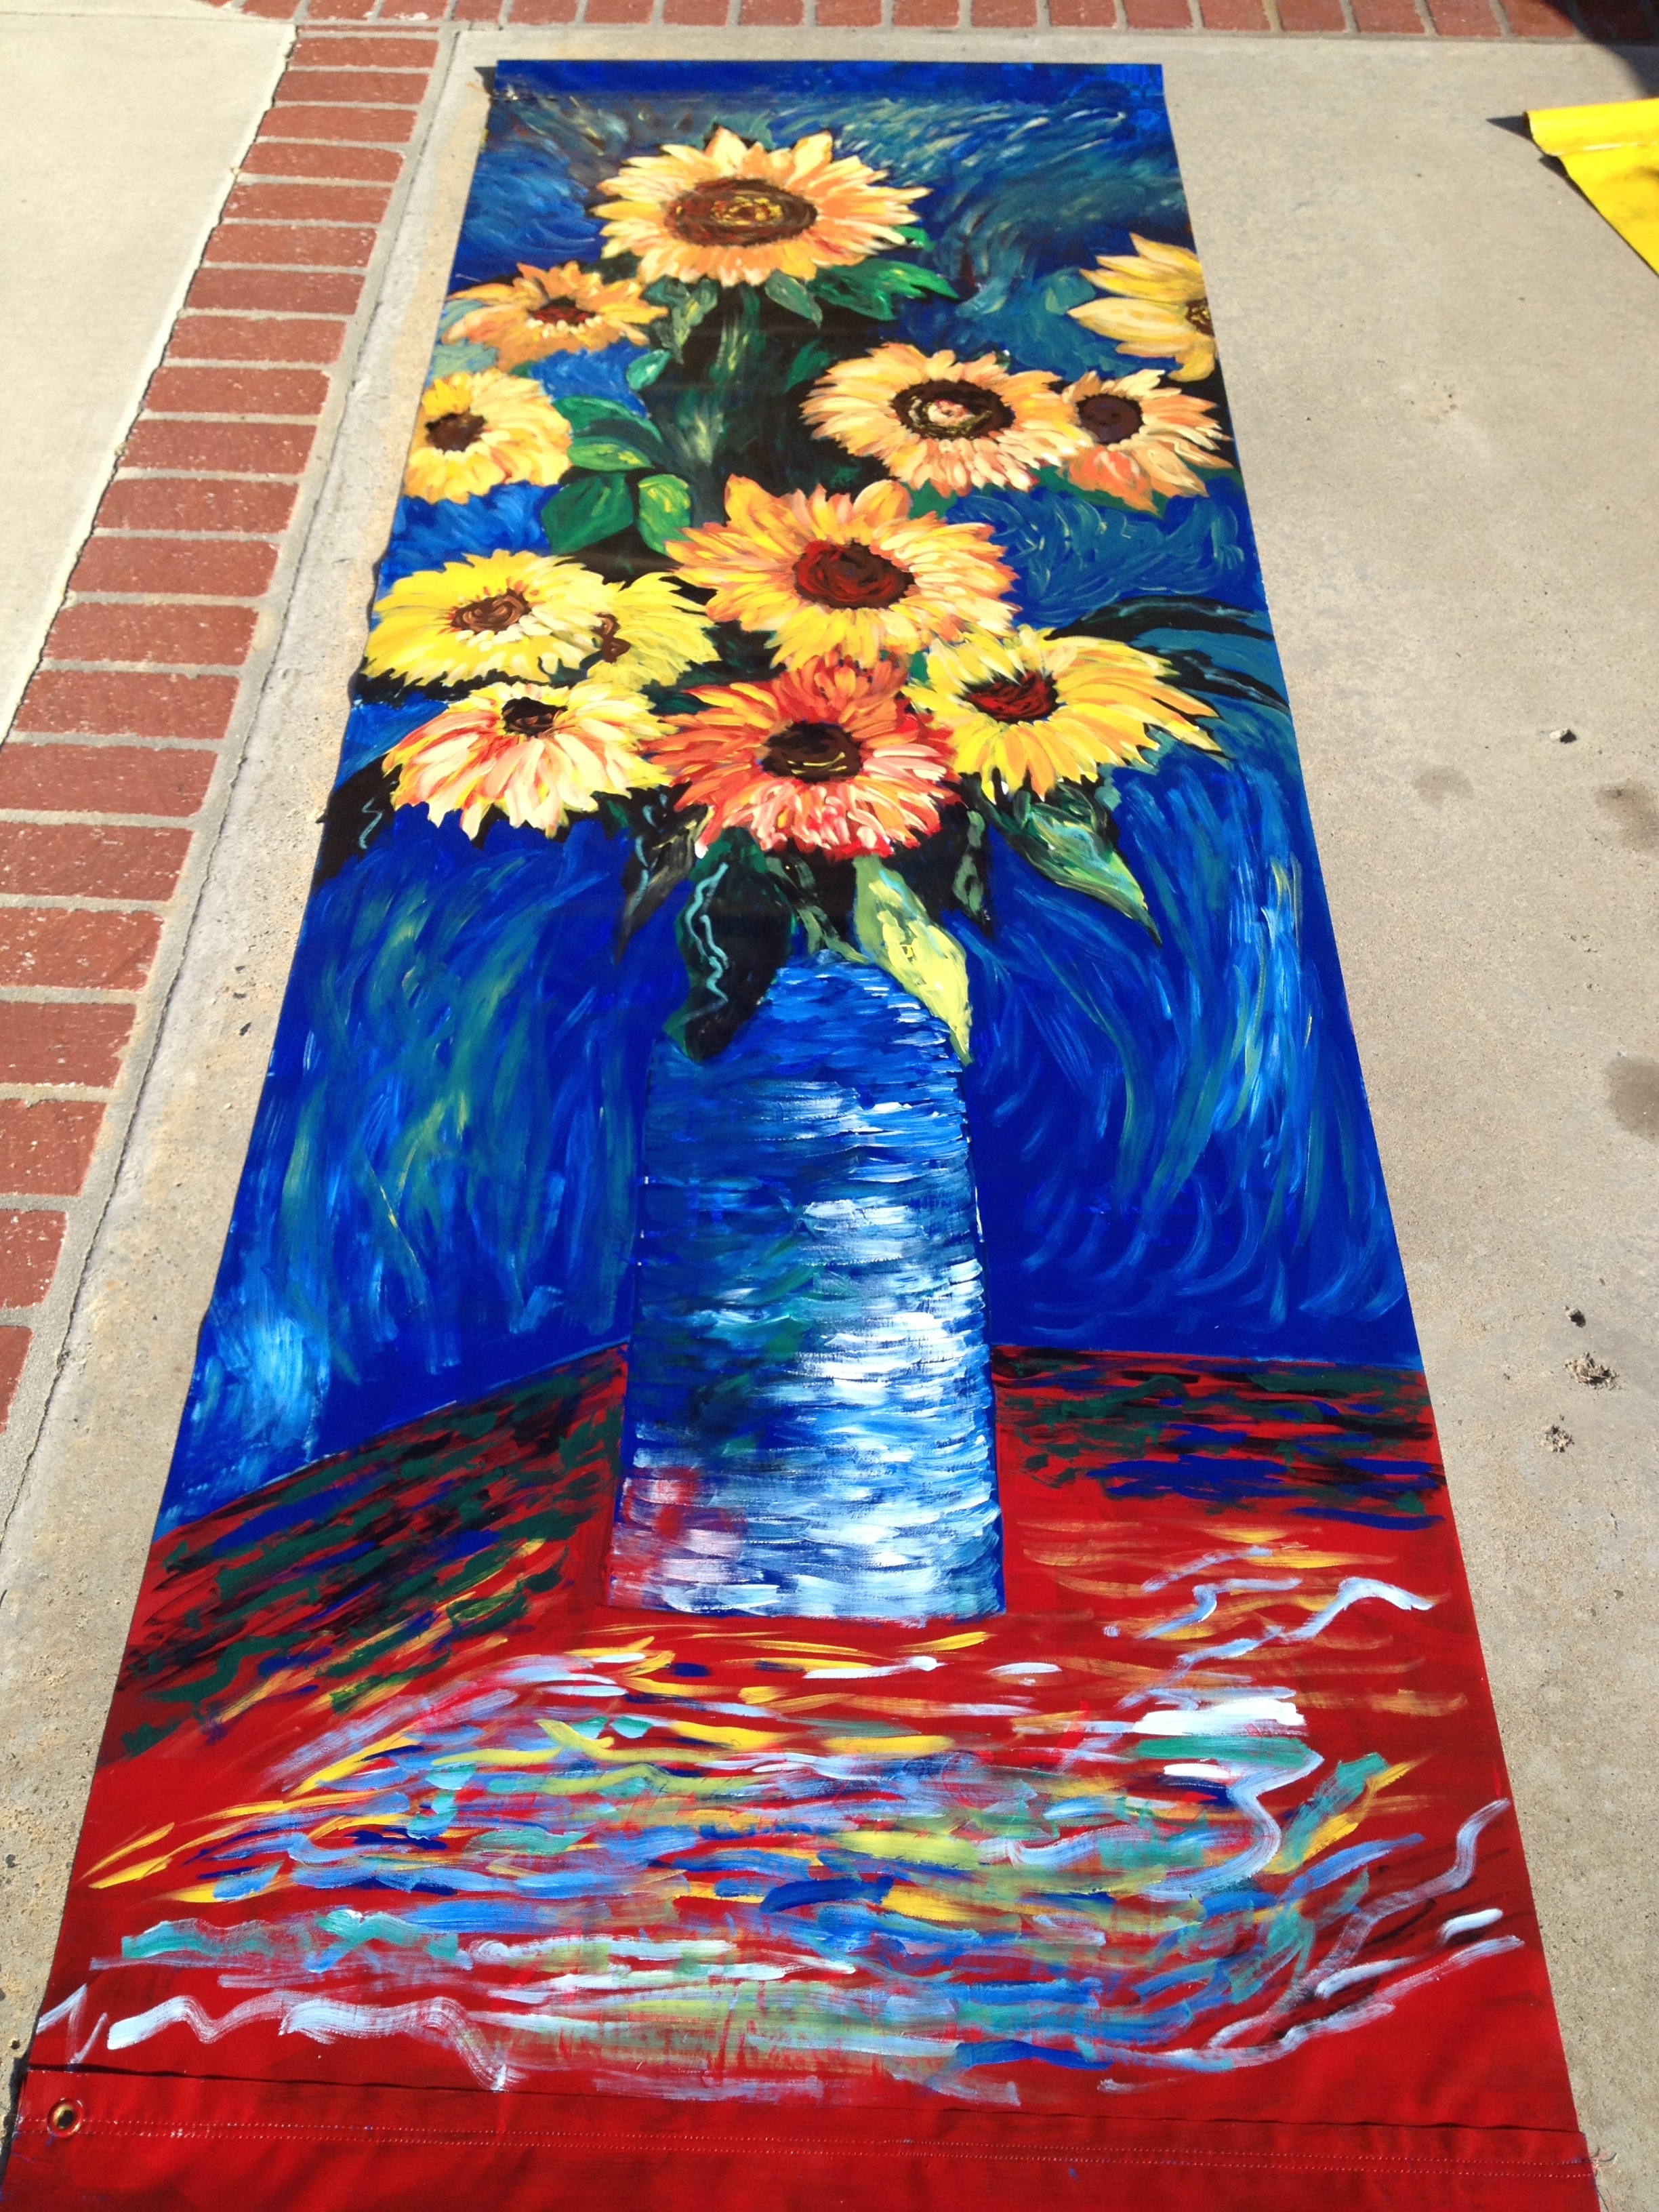 Hand-Painted Banner - Monet